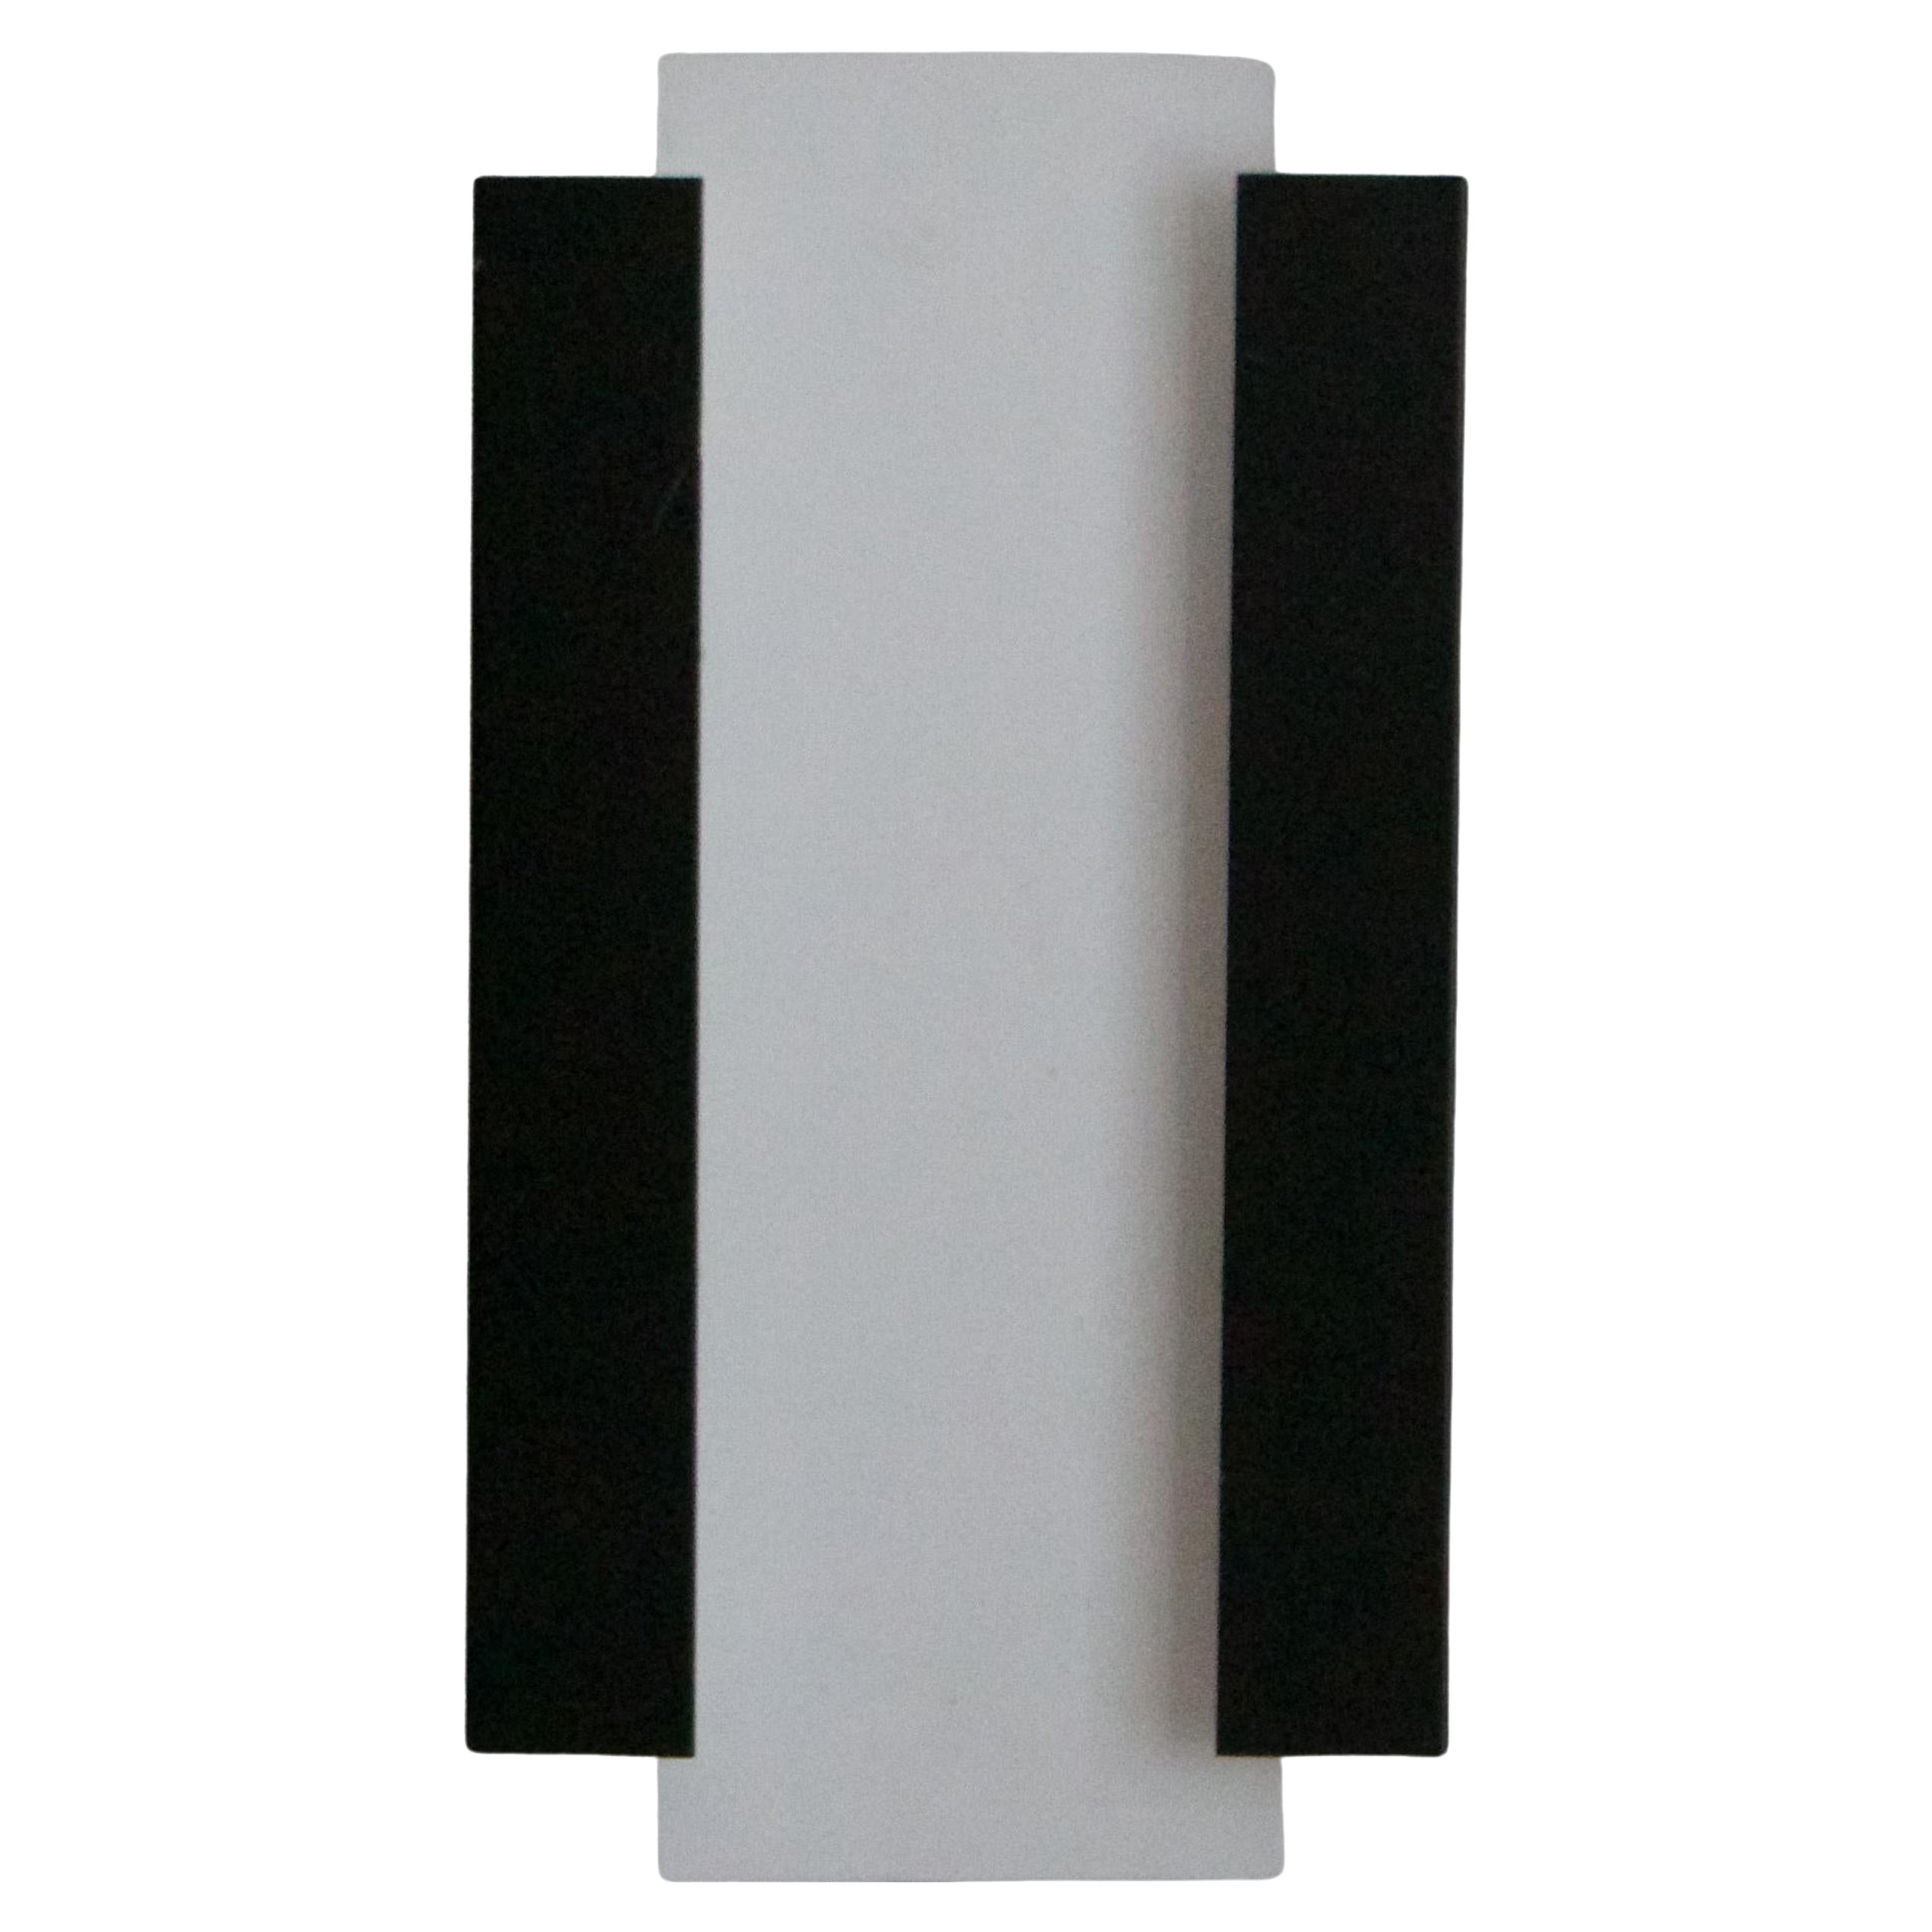 Itsu, Minimalist Wall Light, Black and White Lacquered Metal, Finland, 1950s For Sale